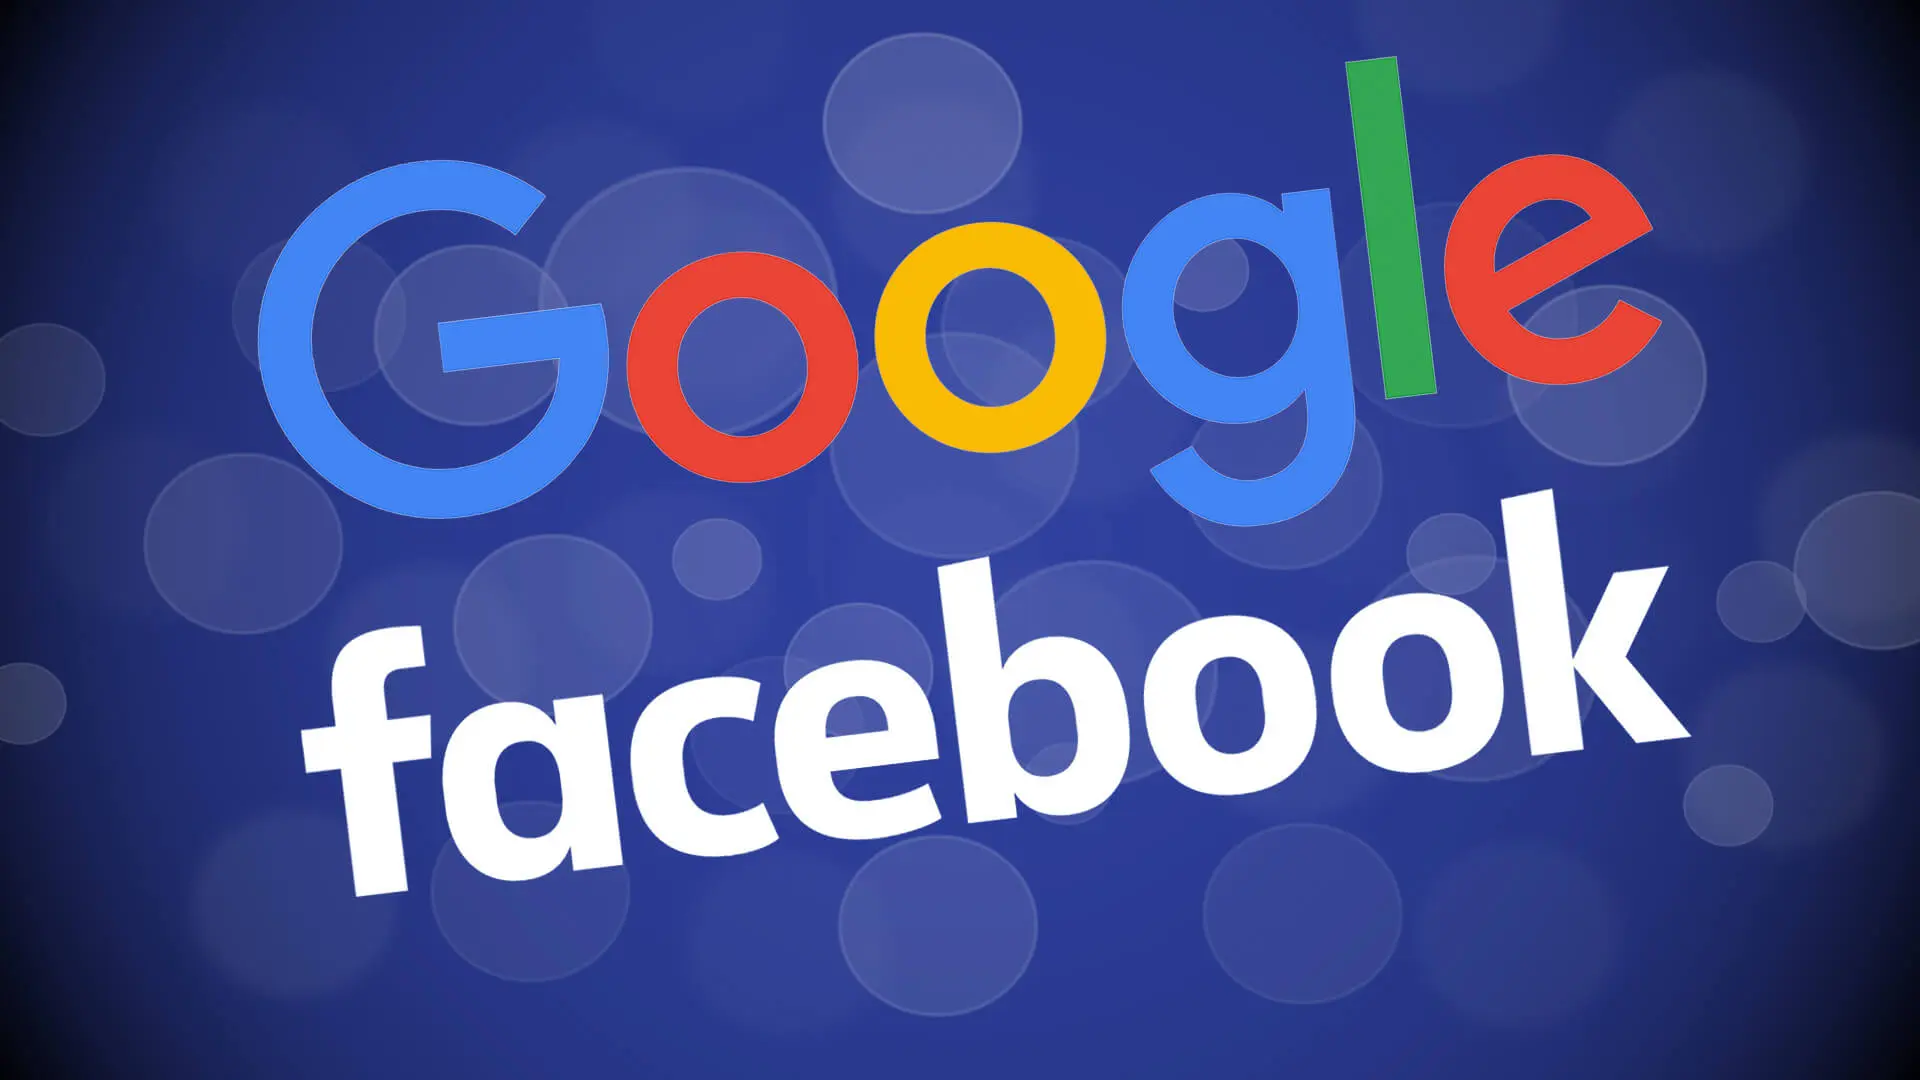 Google and Facebook